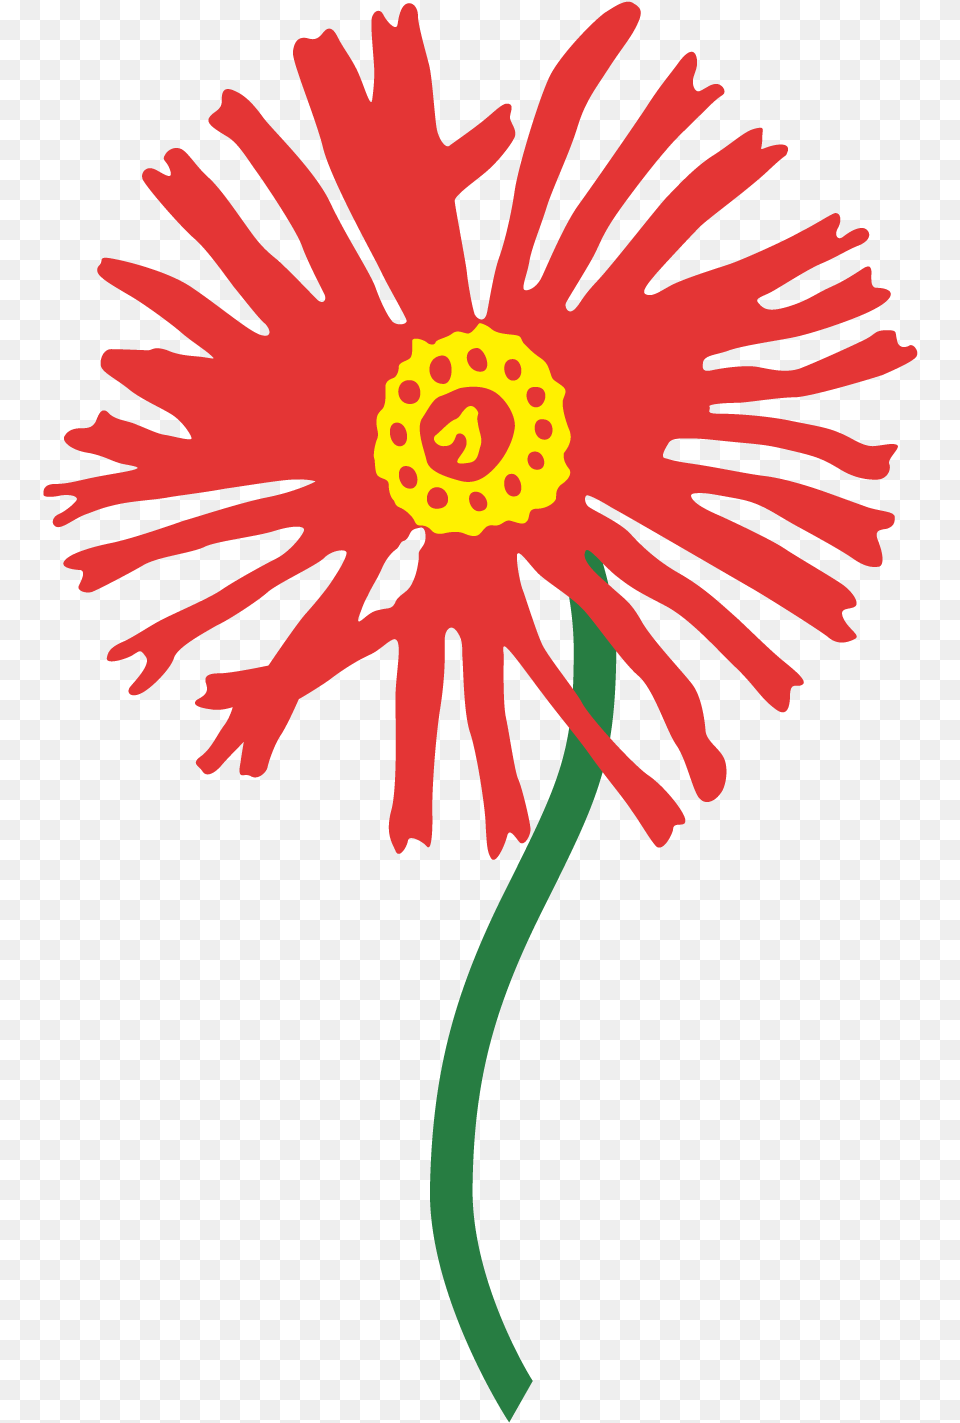 Orange And Red Sunburst, Daisy, Flower, Plant, Anther Png Image